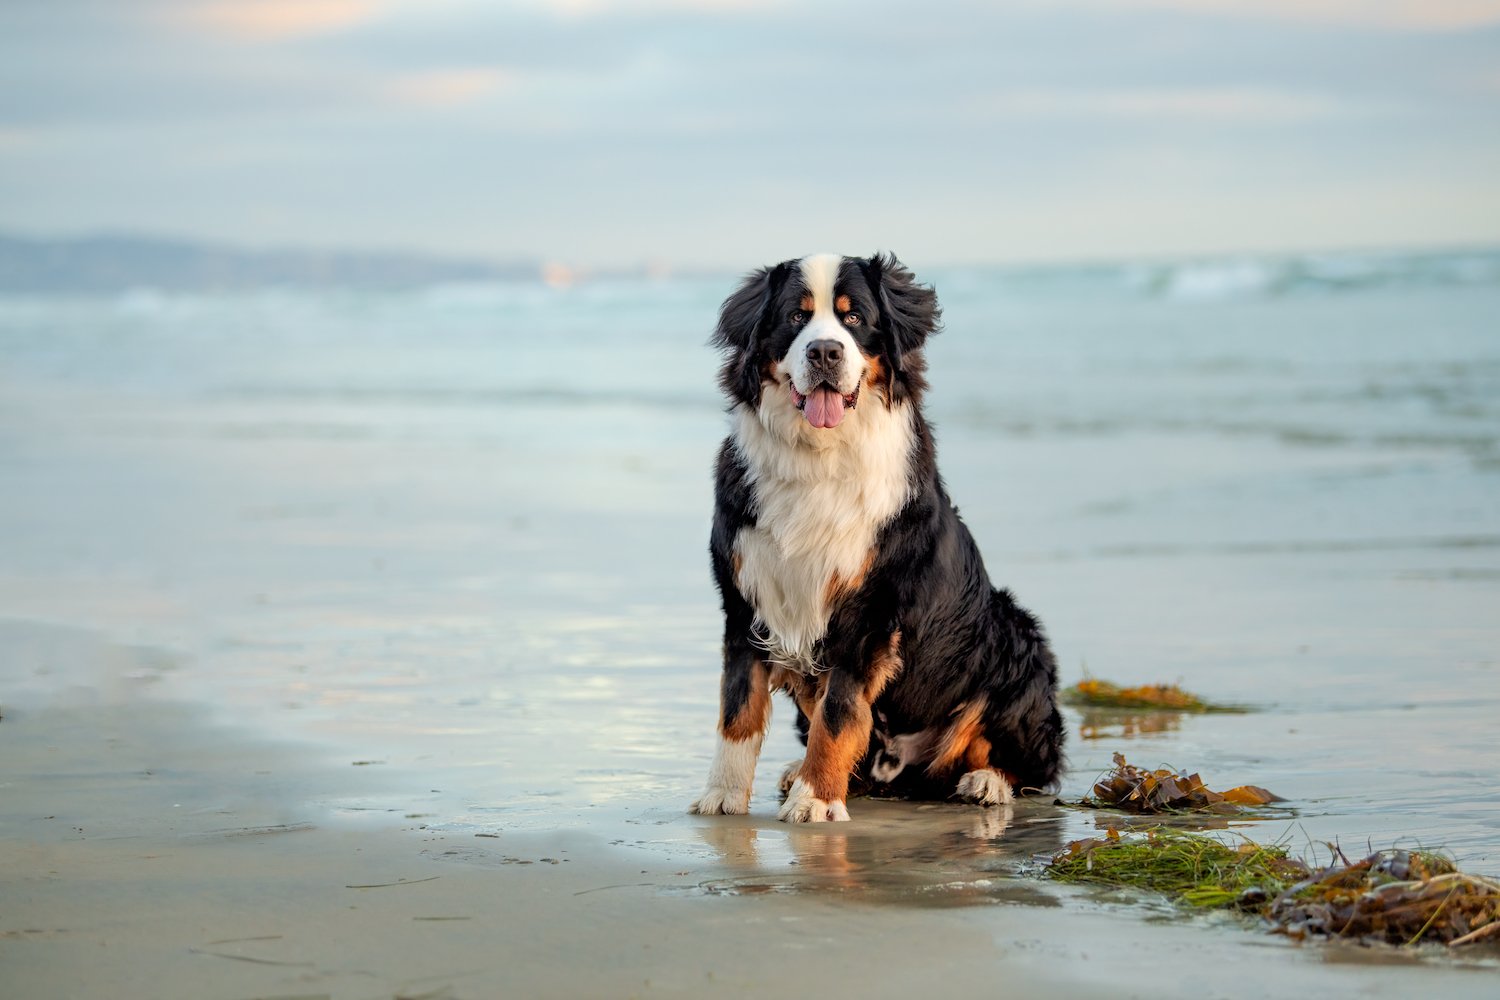 Famous San Diego dog Sumo, a Bernese Mountain Dog that is a popular pet influencer